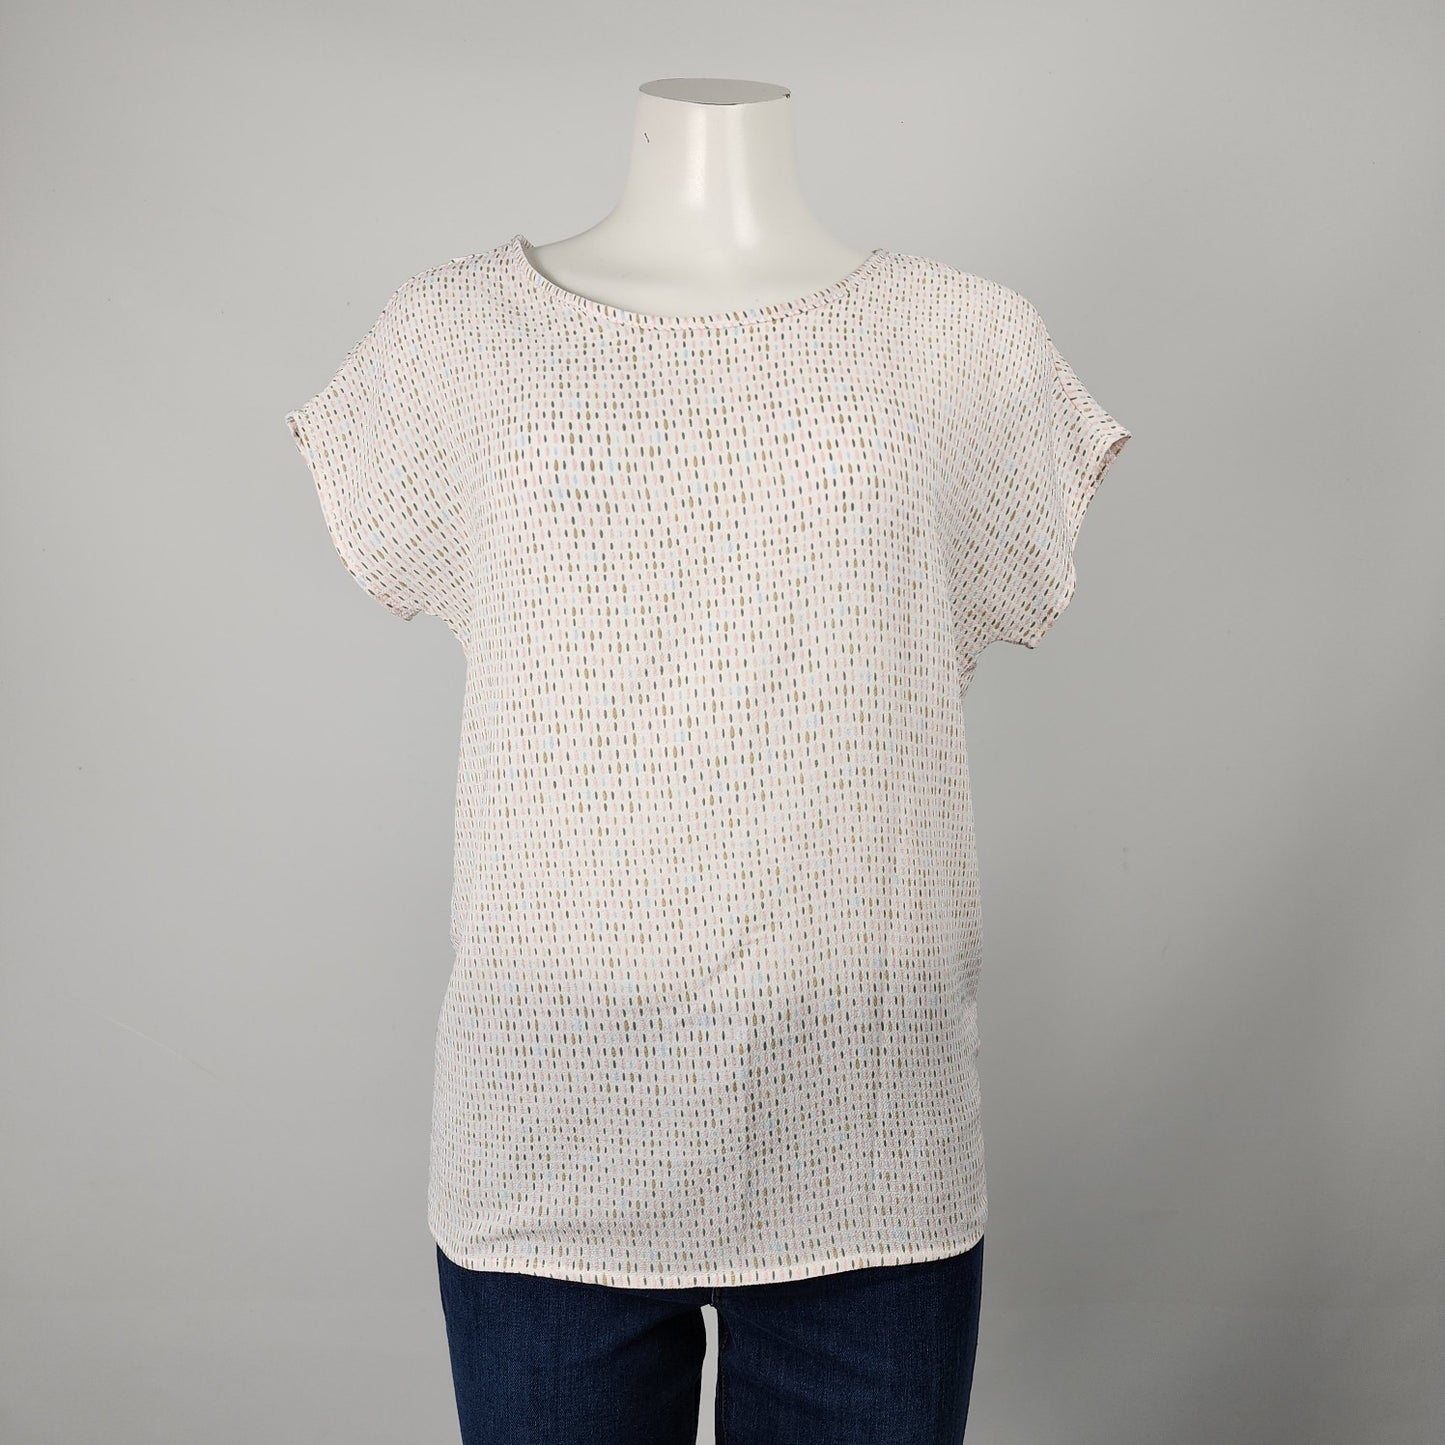 Soya Concept Pink Speckle Print Short Sleeve Top Size XS/S